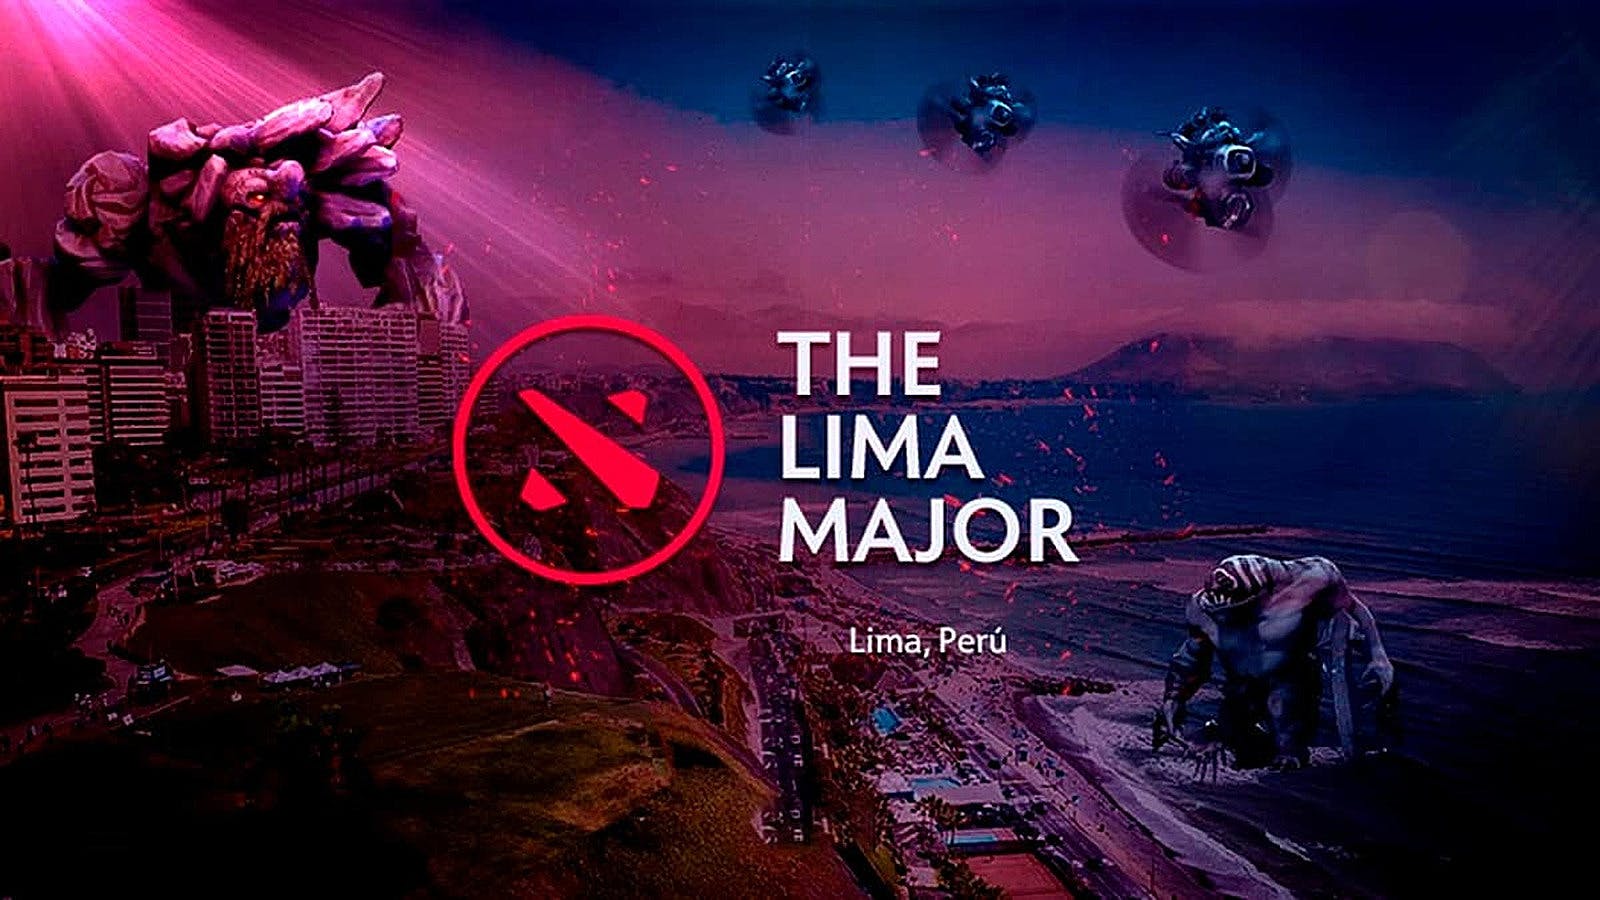 The Lima Major: Analyzing the Differences in Metas